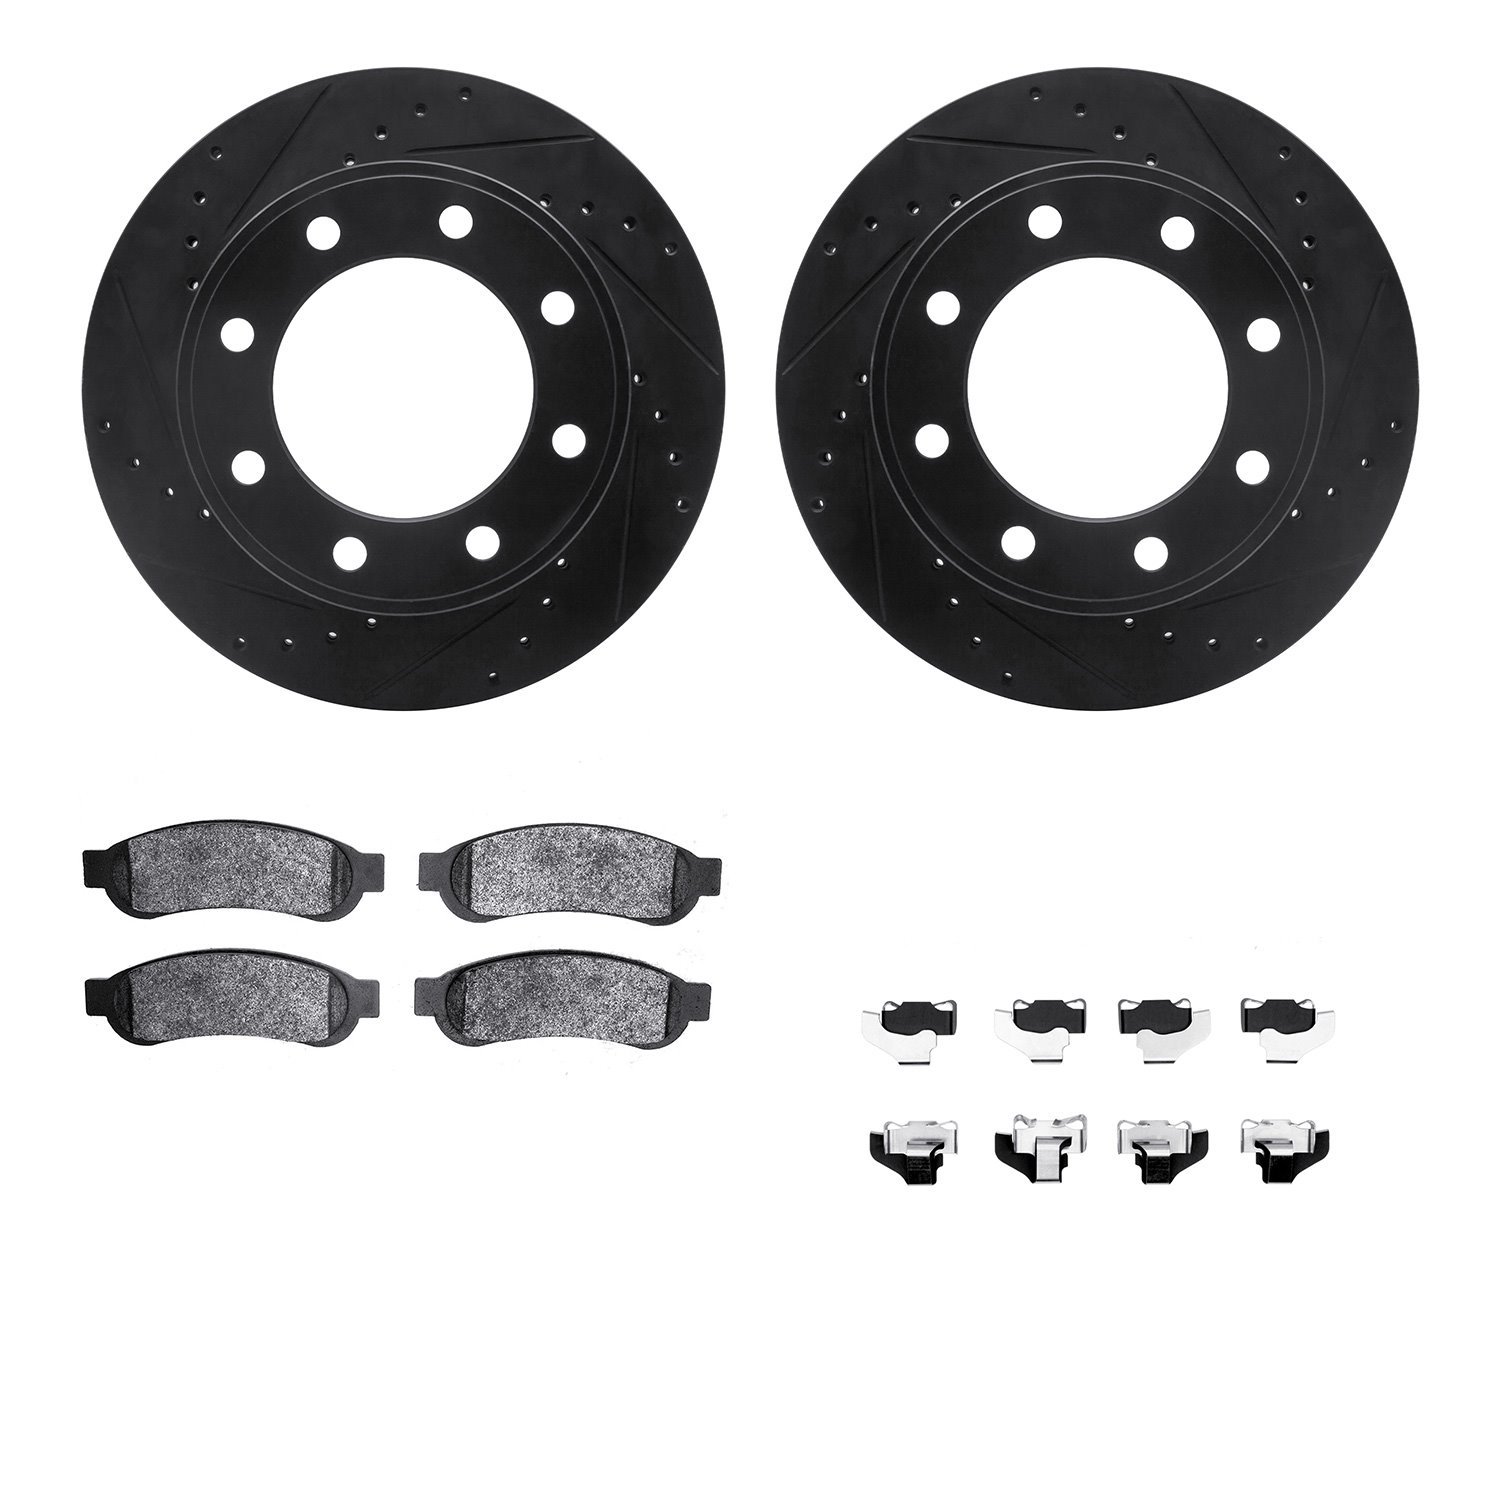 8412-54085 Drilled/Slotted Brake Rotors with Ultimate-Duty Brake Pads Kit & Hardware [Black], 2010-2012 Ford/Lincoln/Mercury/Maz